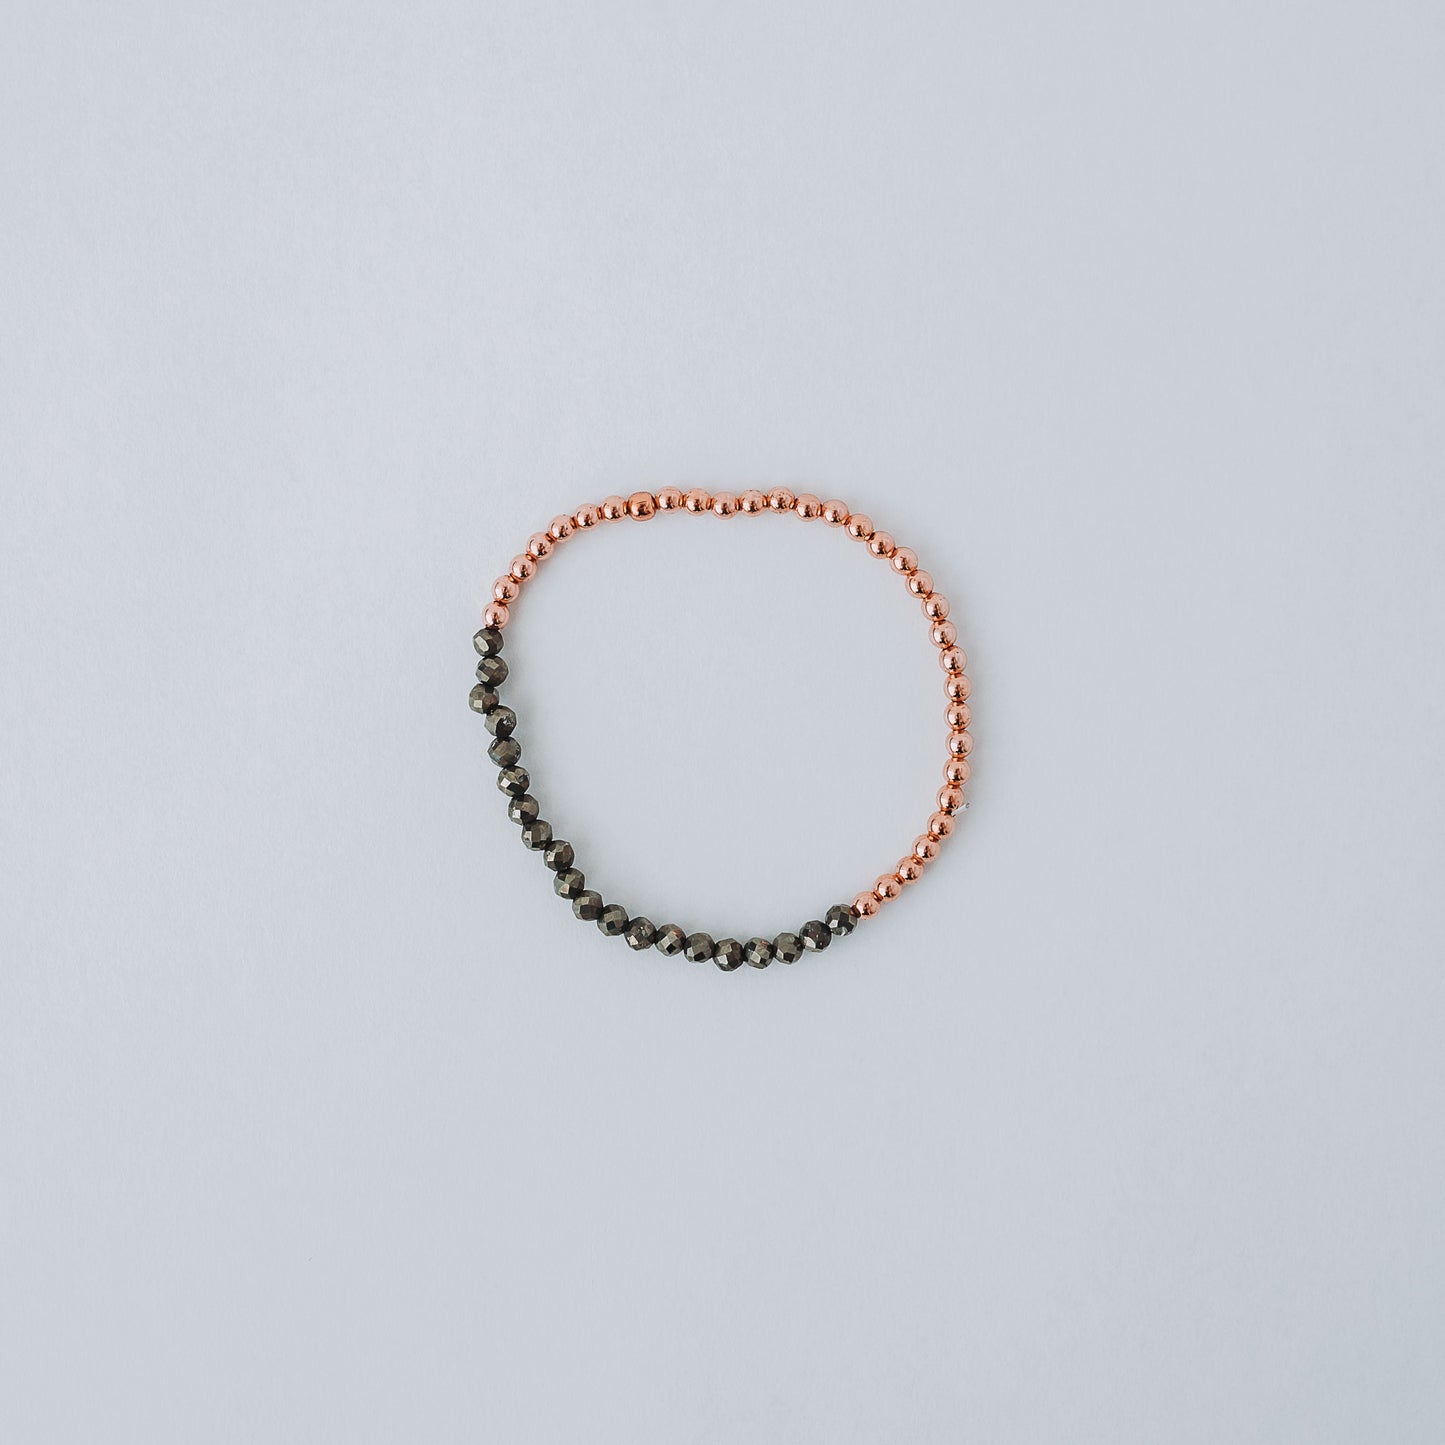 Dainty and Elegant Multi-Faceted Pyrite beads + Genuine and solid 3mm Copper Bead Bracelet - Stretchy and Stackable - Theblueyogi